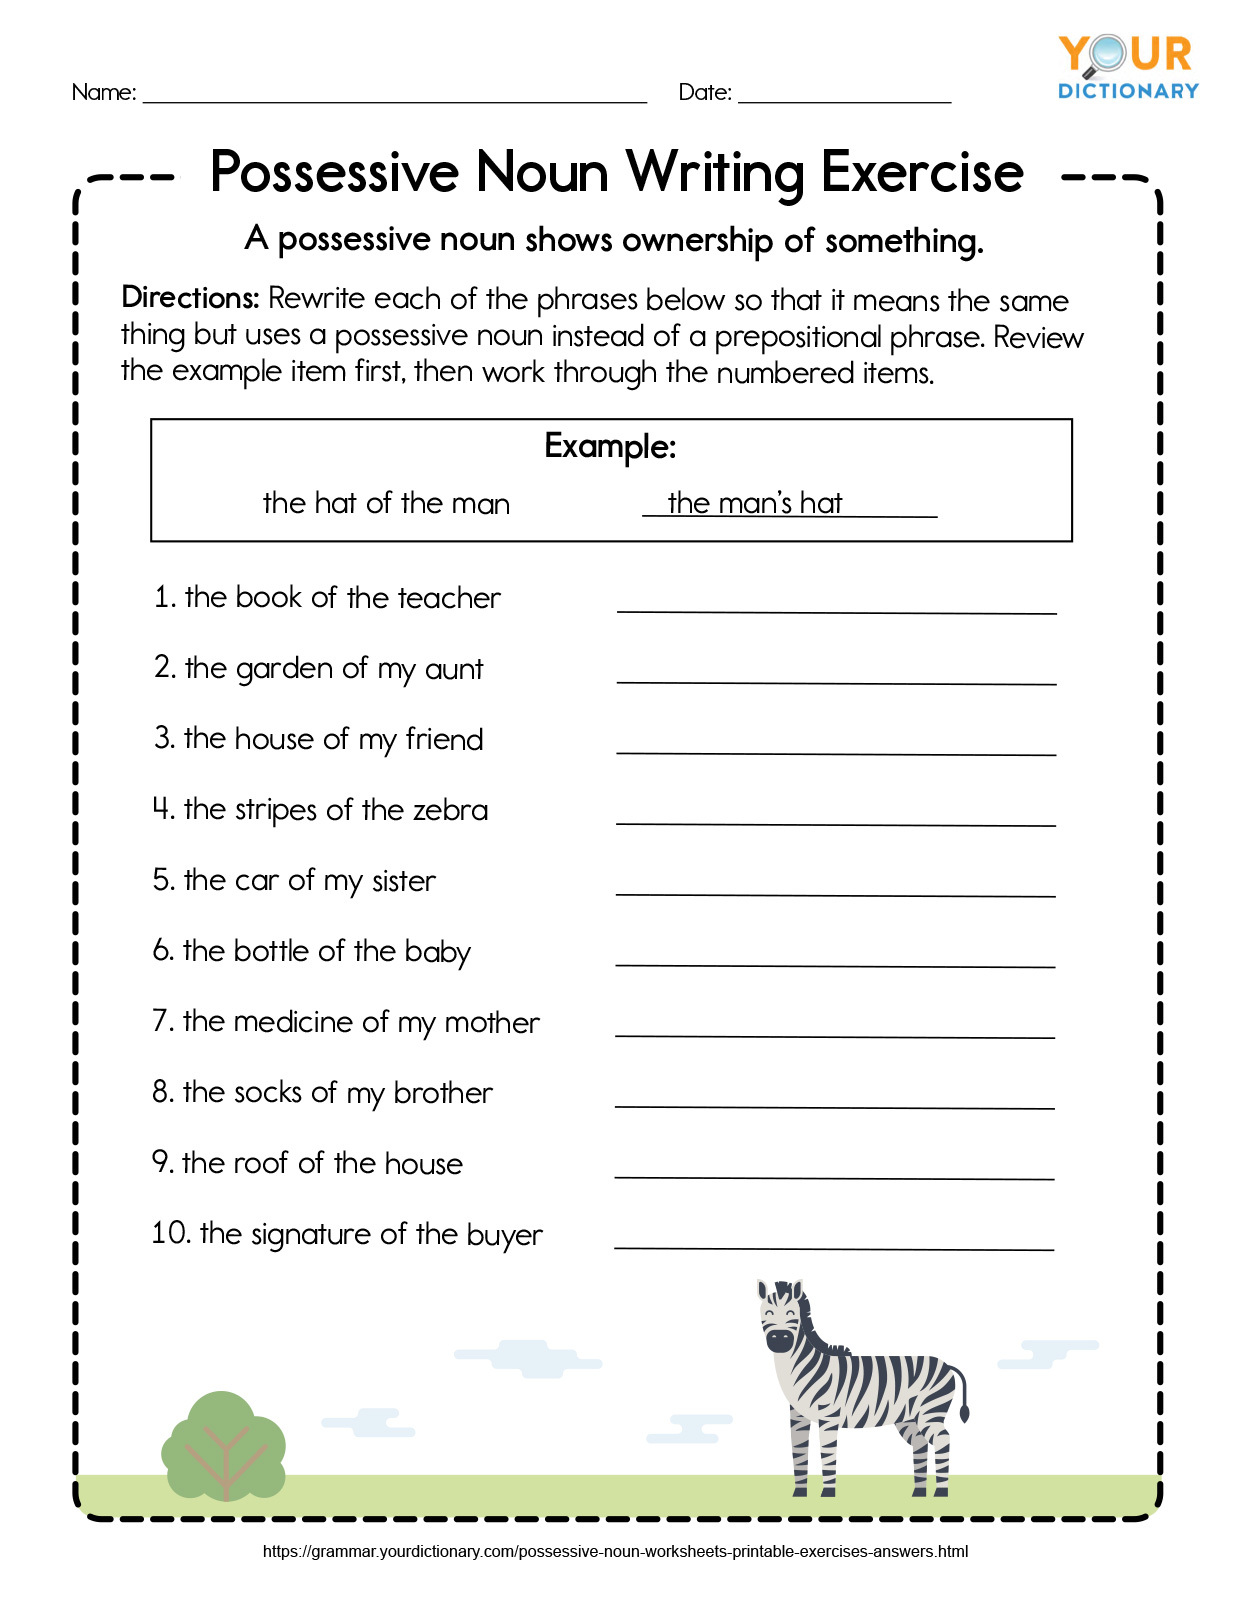 Possessive Noun Worksheets Printable Exercises With Answers 